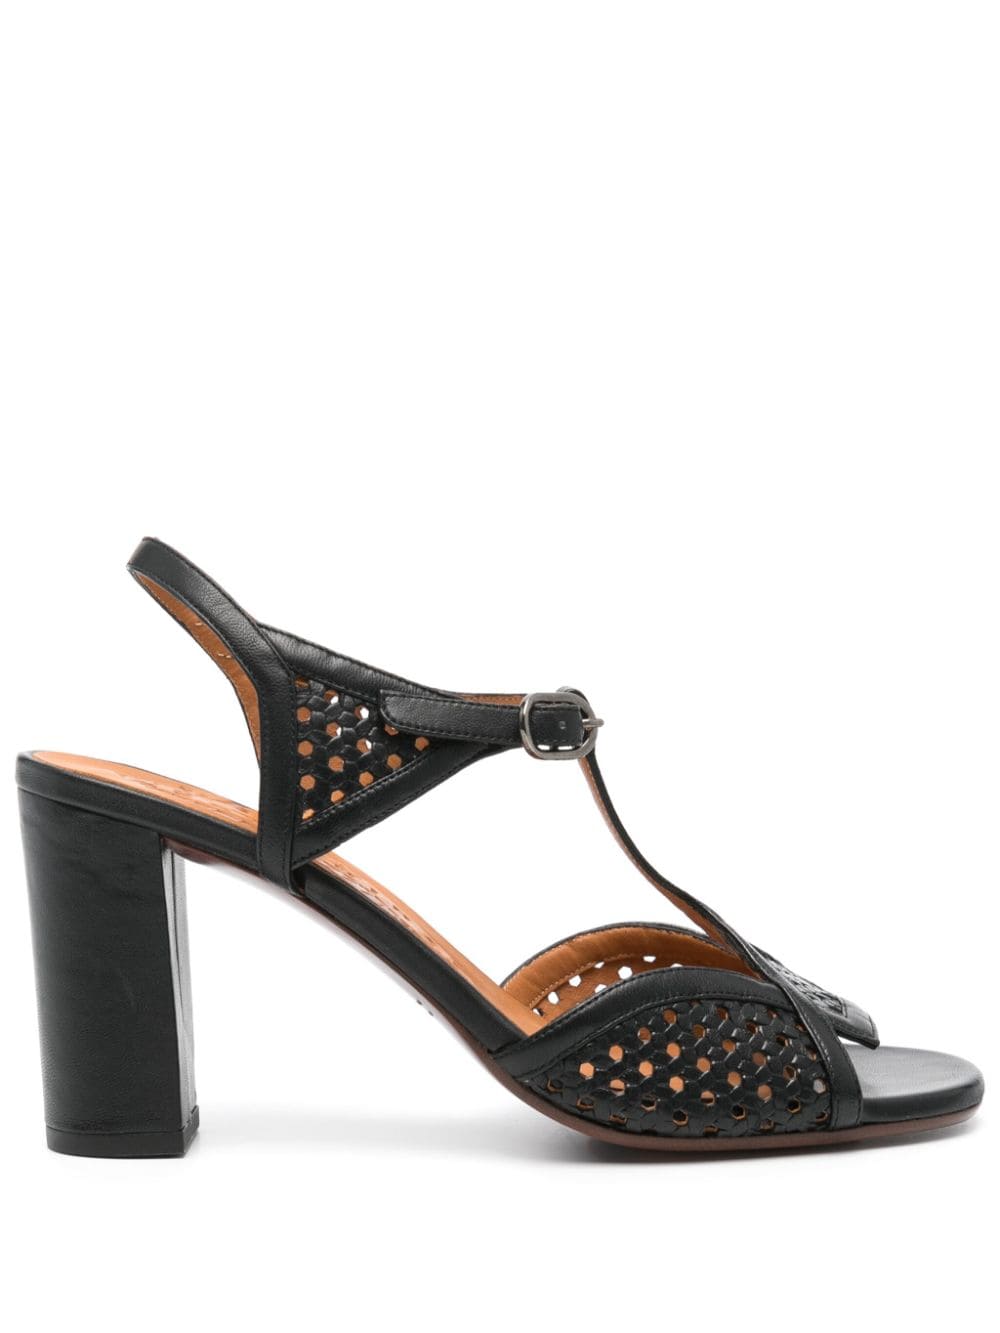 Chie Mihara 75mm Bessy perforated leather sandals - Black von Chie Mihara